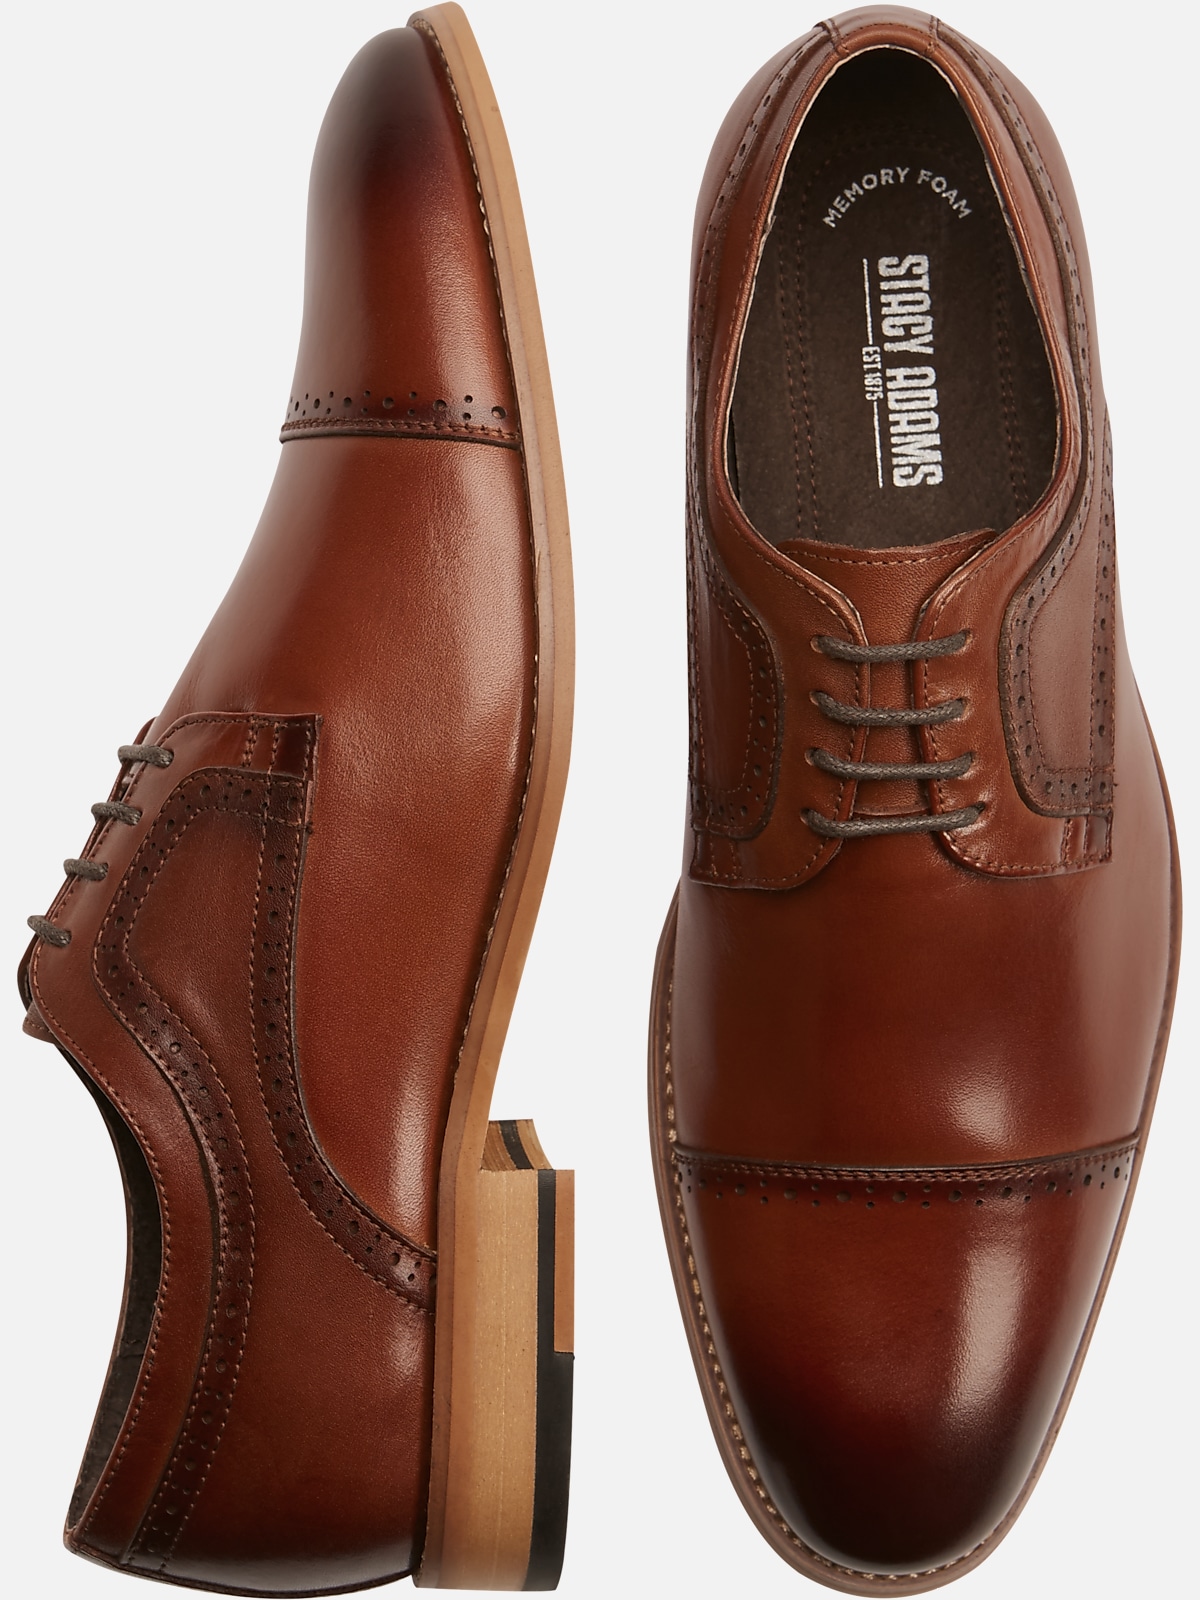 Stacy Adams Dickinson Cap Toe Oxfords | All Clearance $39.99| Men's ...